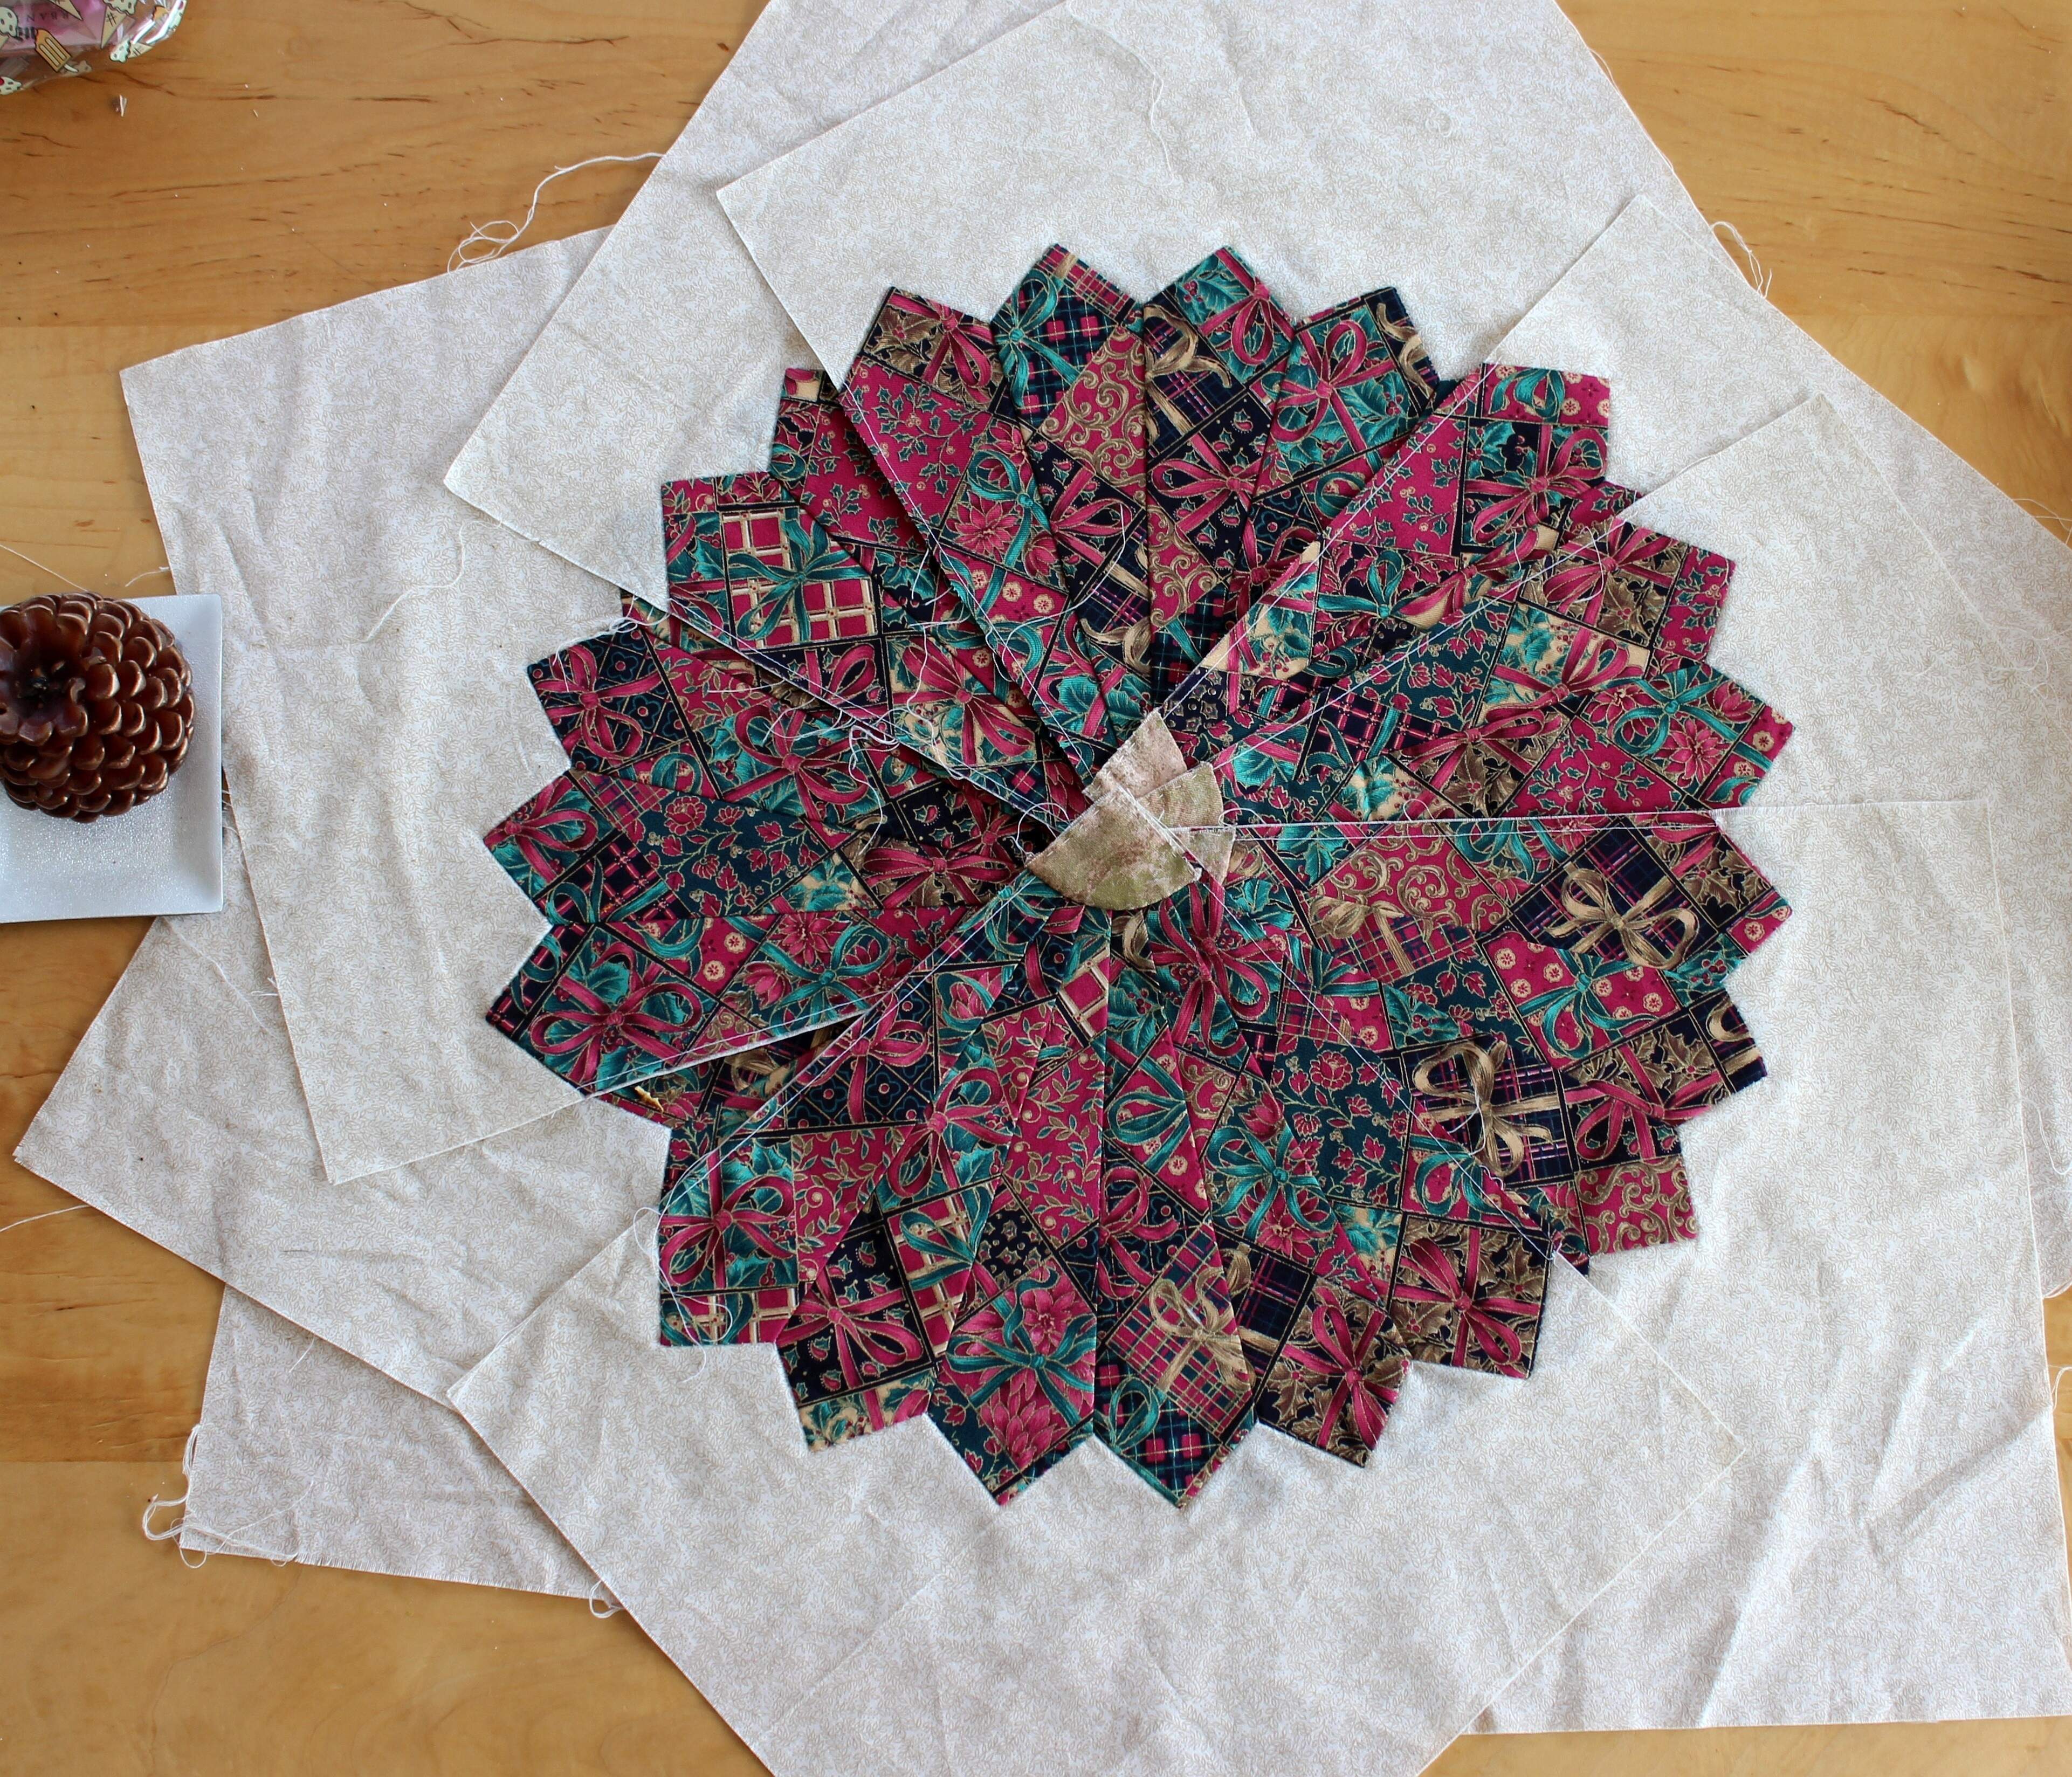 The Great Sewing Room Cleanup Giveaway #1: Grandmother’s Fan Blocks